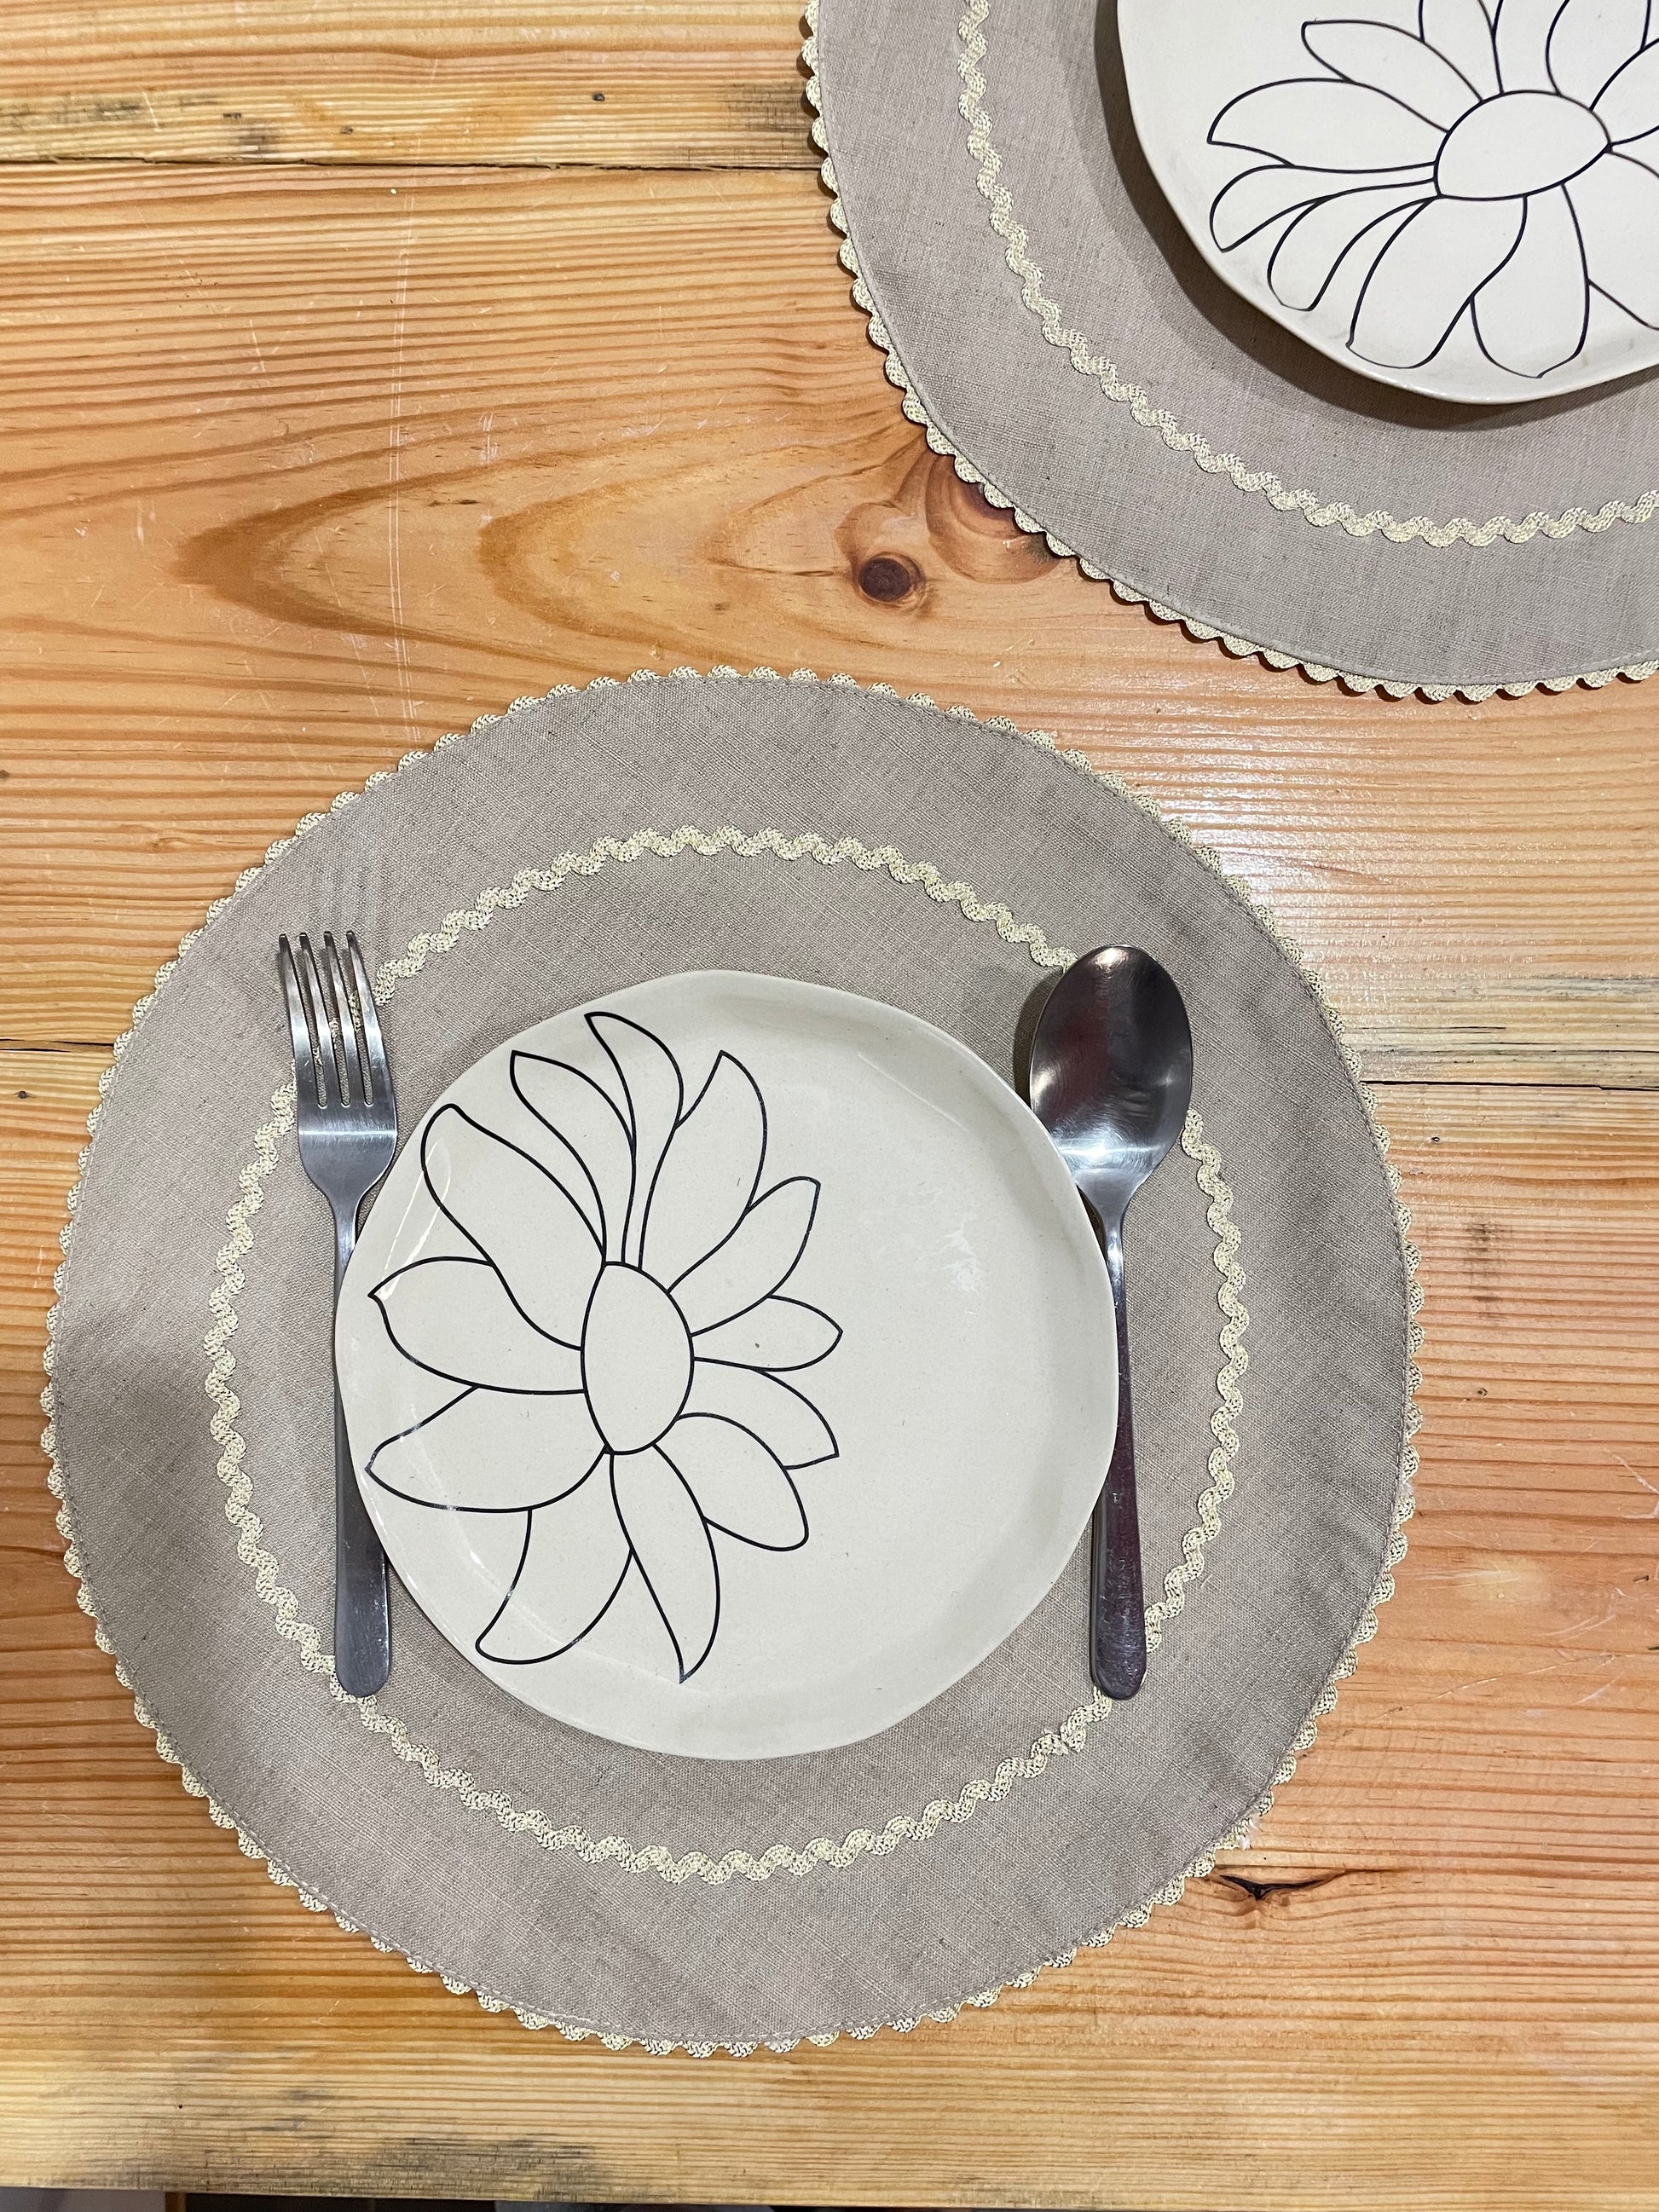 Two round beige cotton table mats with silver scallop border and interior circle, round ceramic plate, and cutlery. Buy artistic ceramics Bangalore.